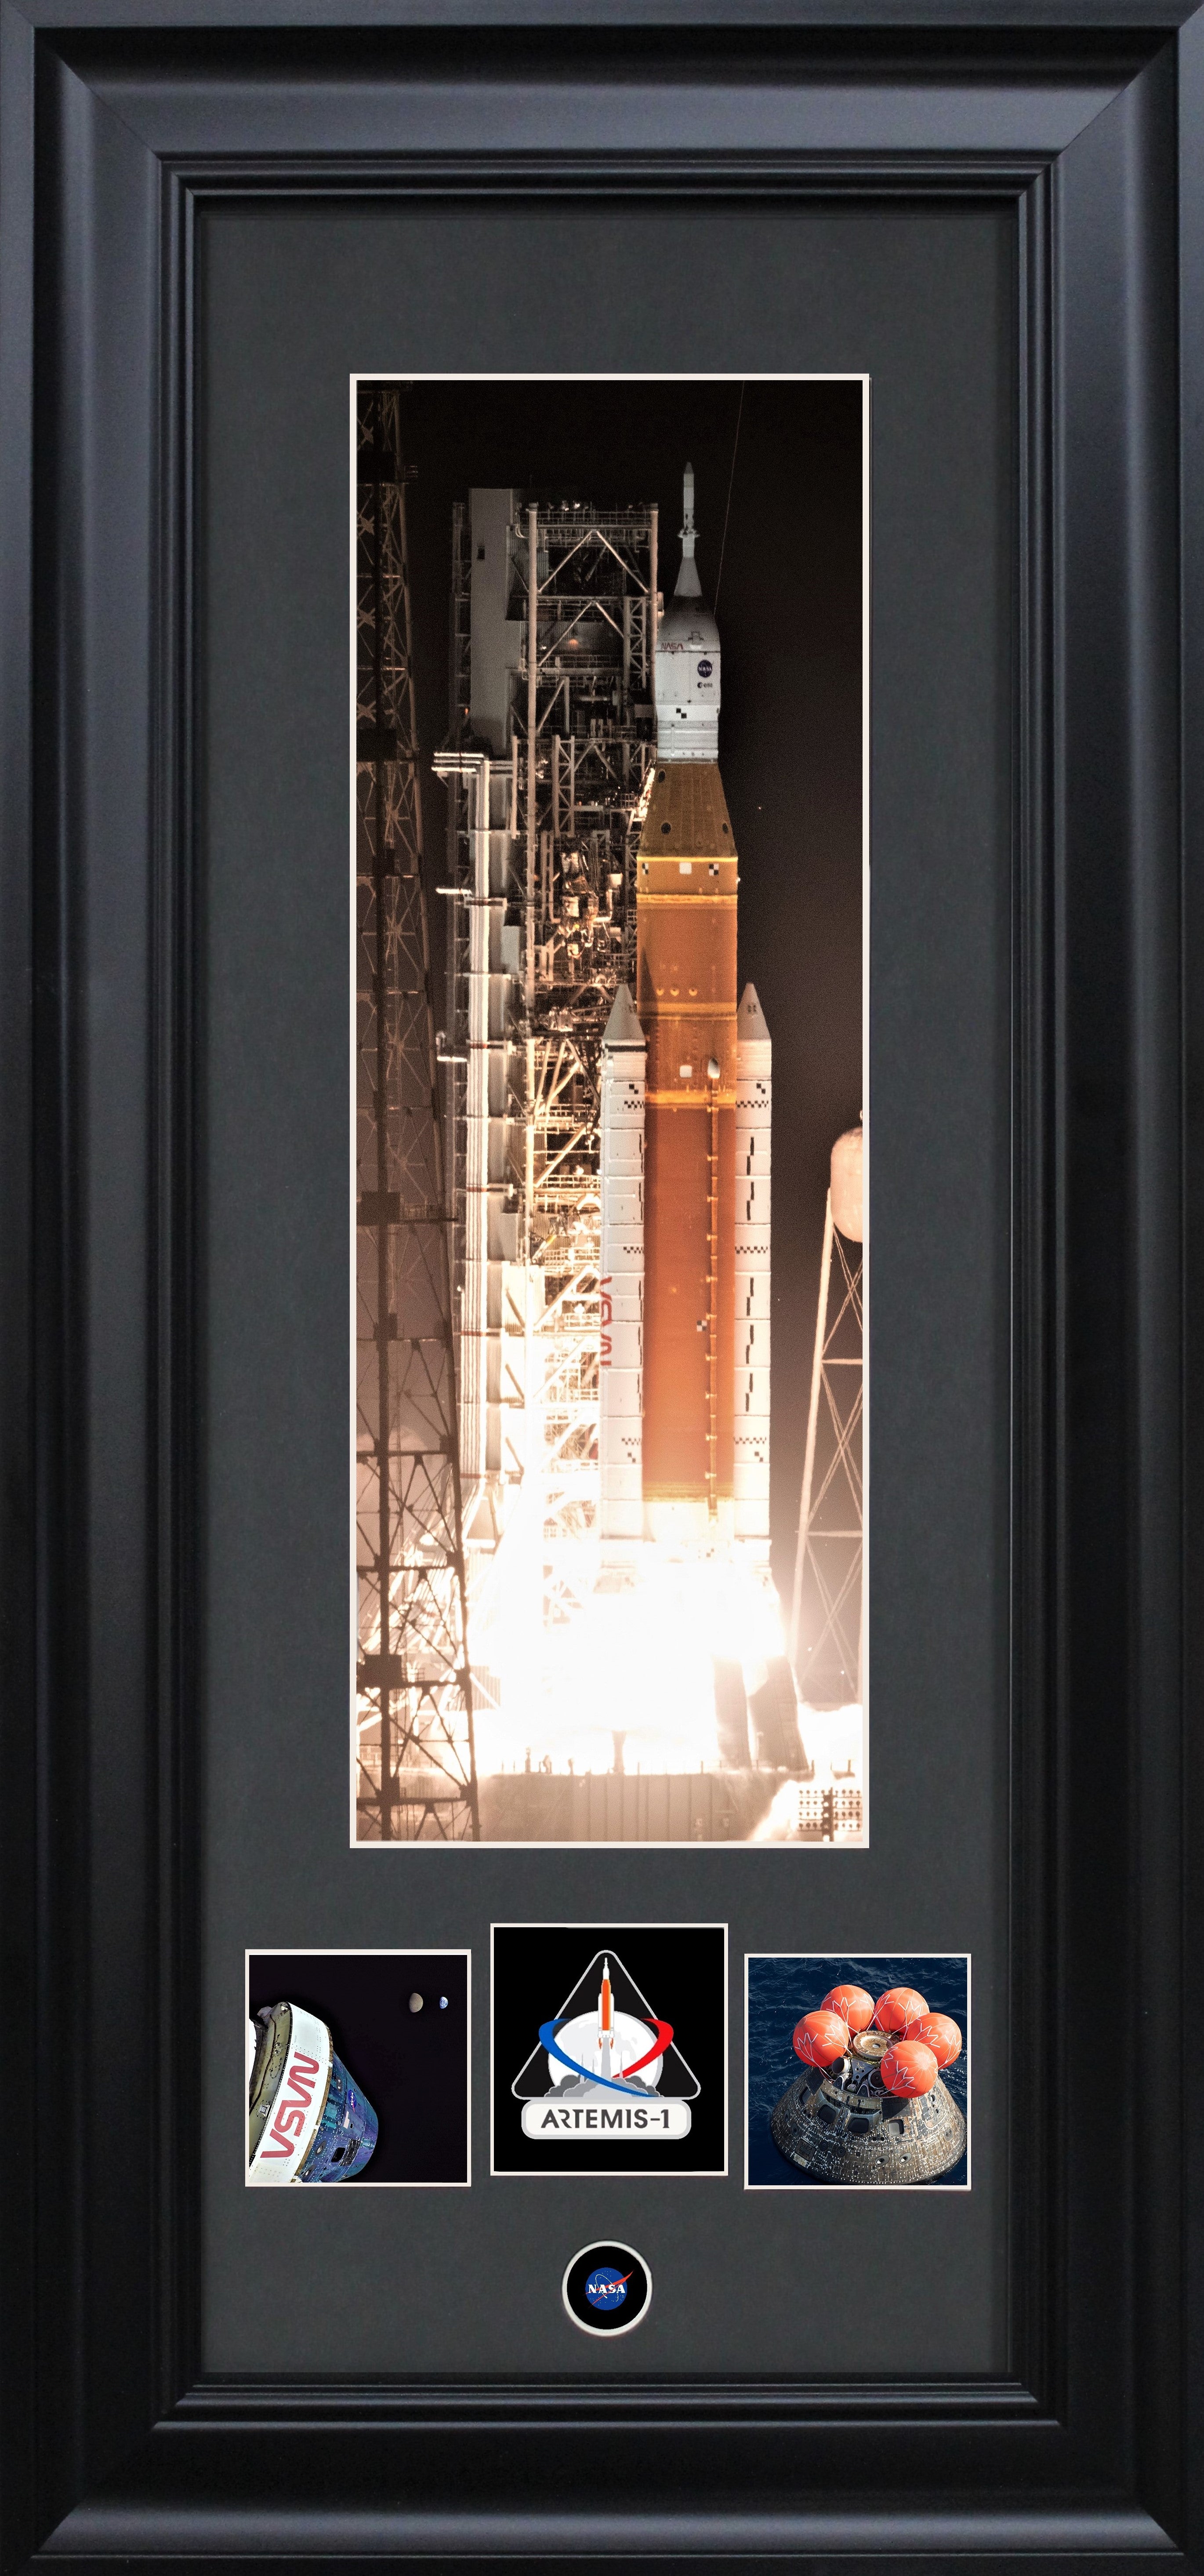 Artemis 1 Rocket Launch Frame - The Space Store